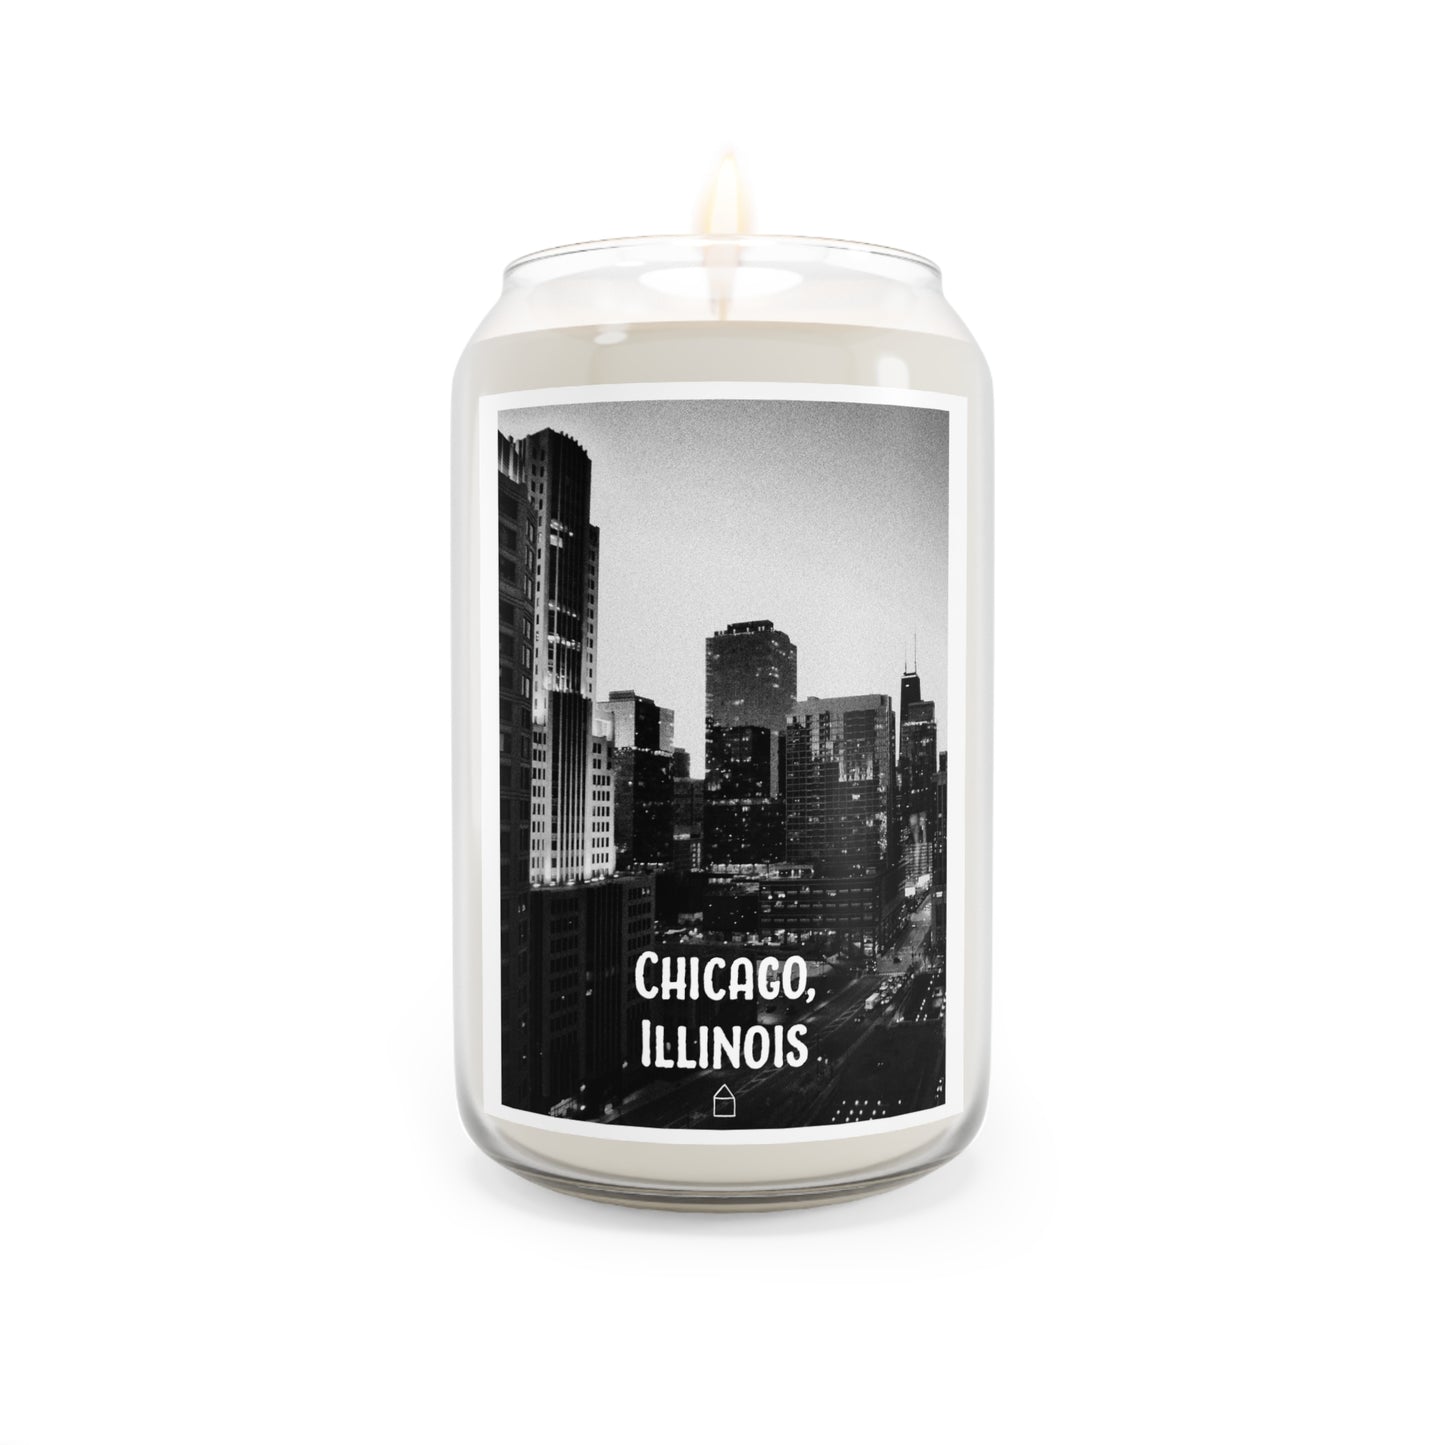 Chicago, Illinois (#005) - Home Town Candles, 13.75oz